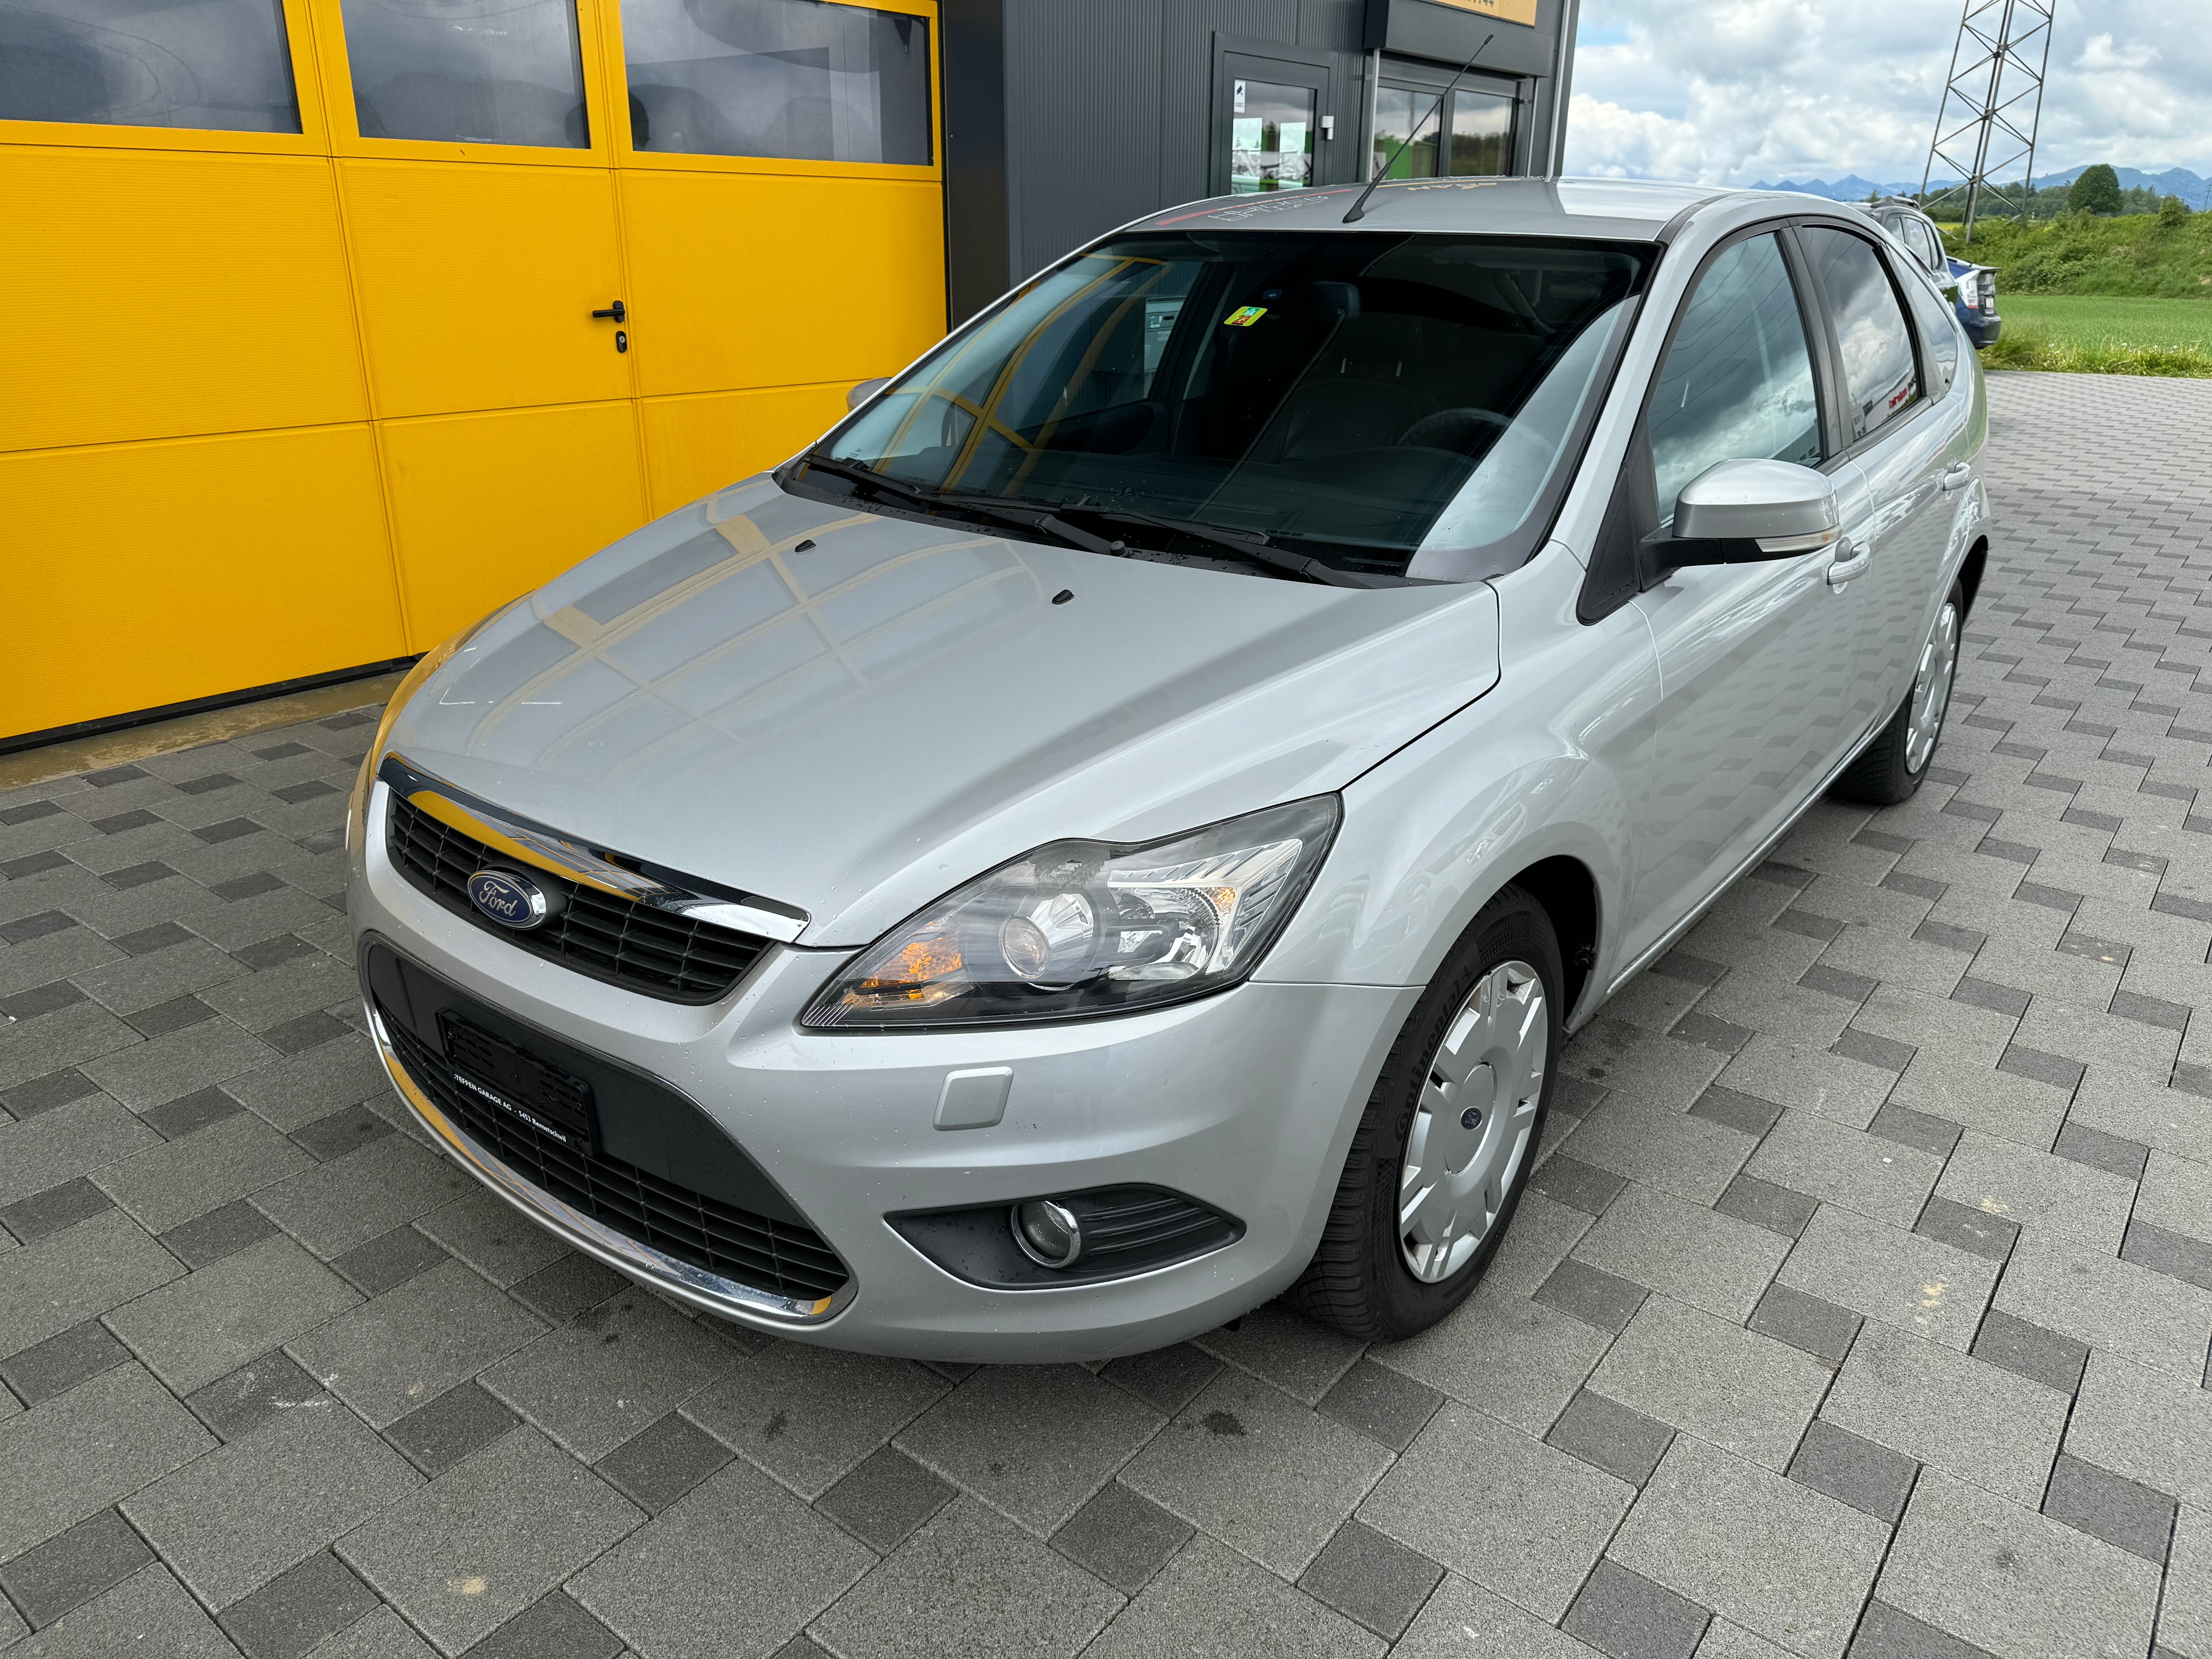 FORD Focus 2.0i Carving Automatic